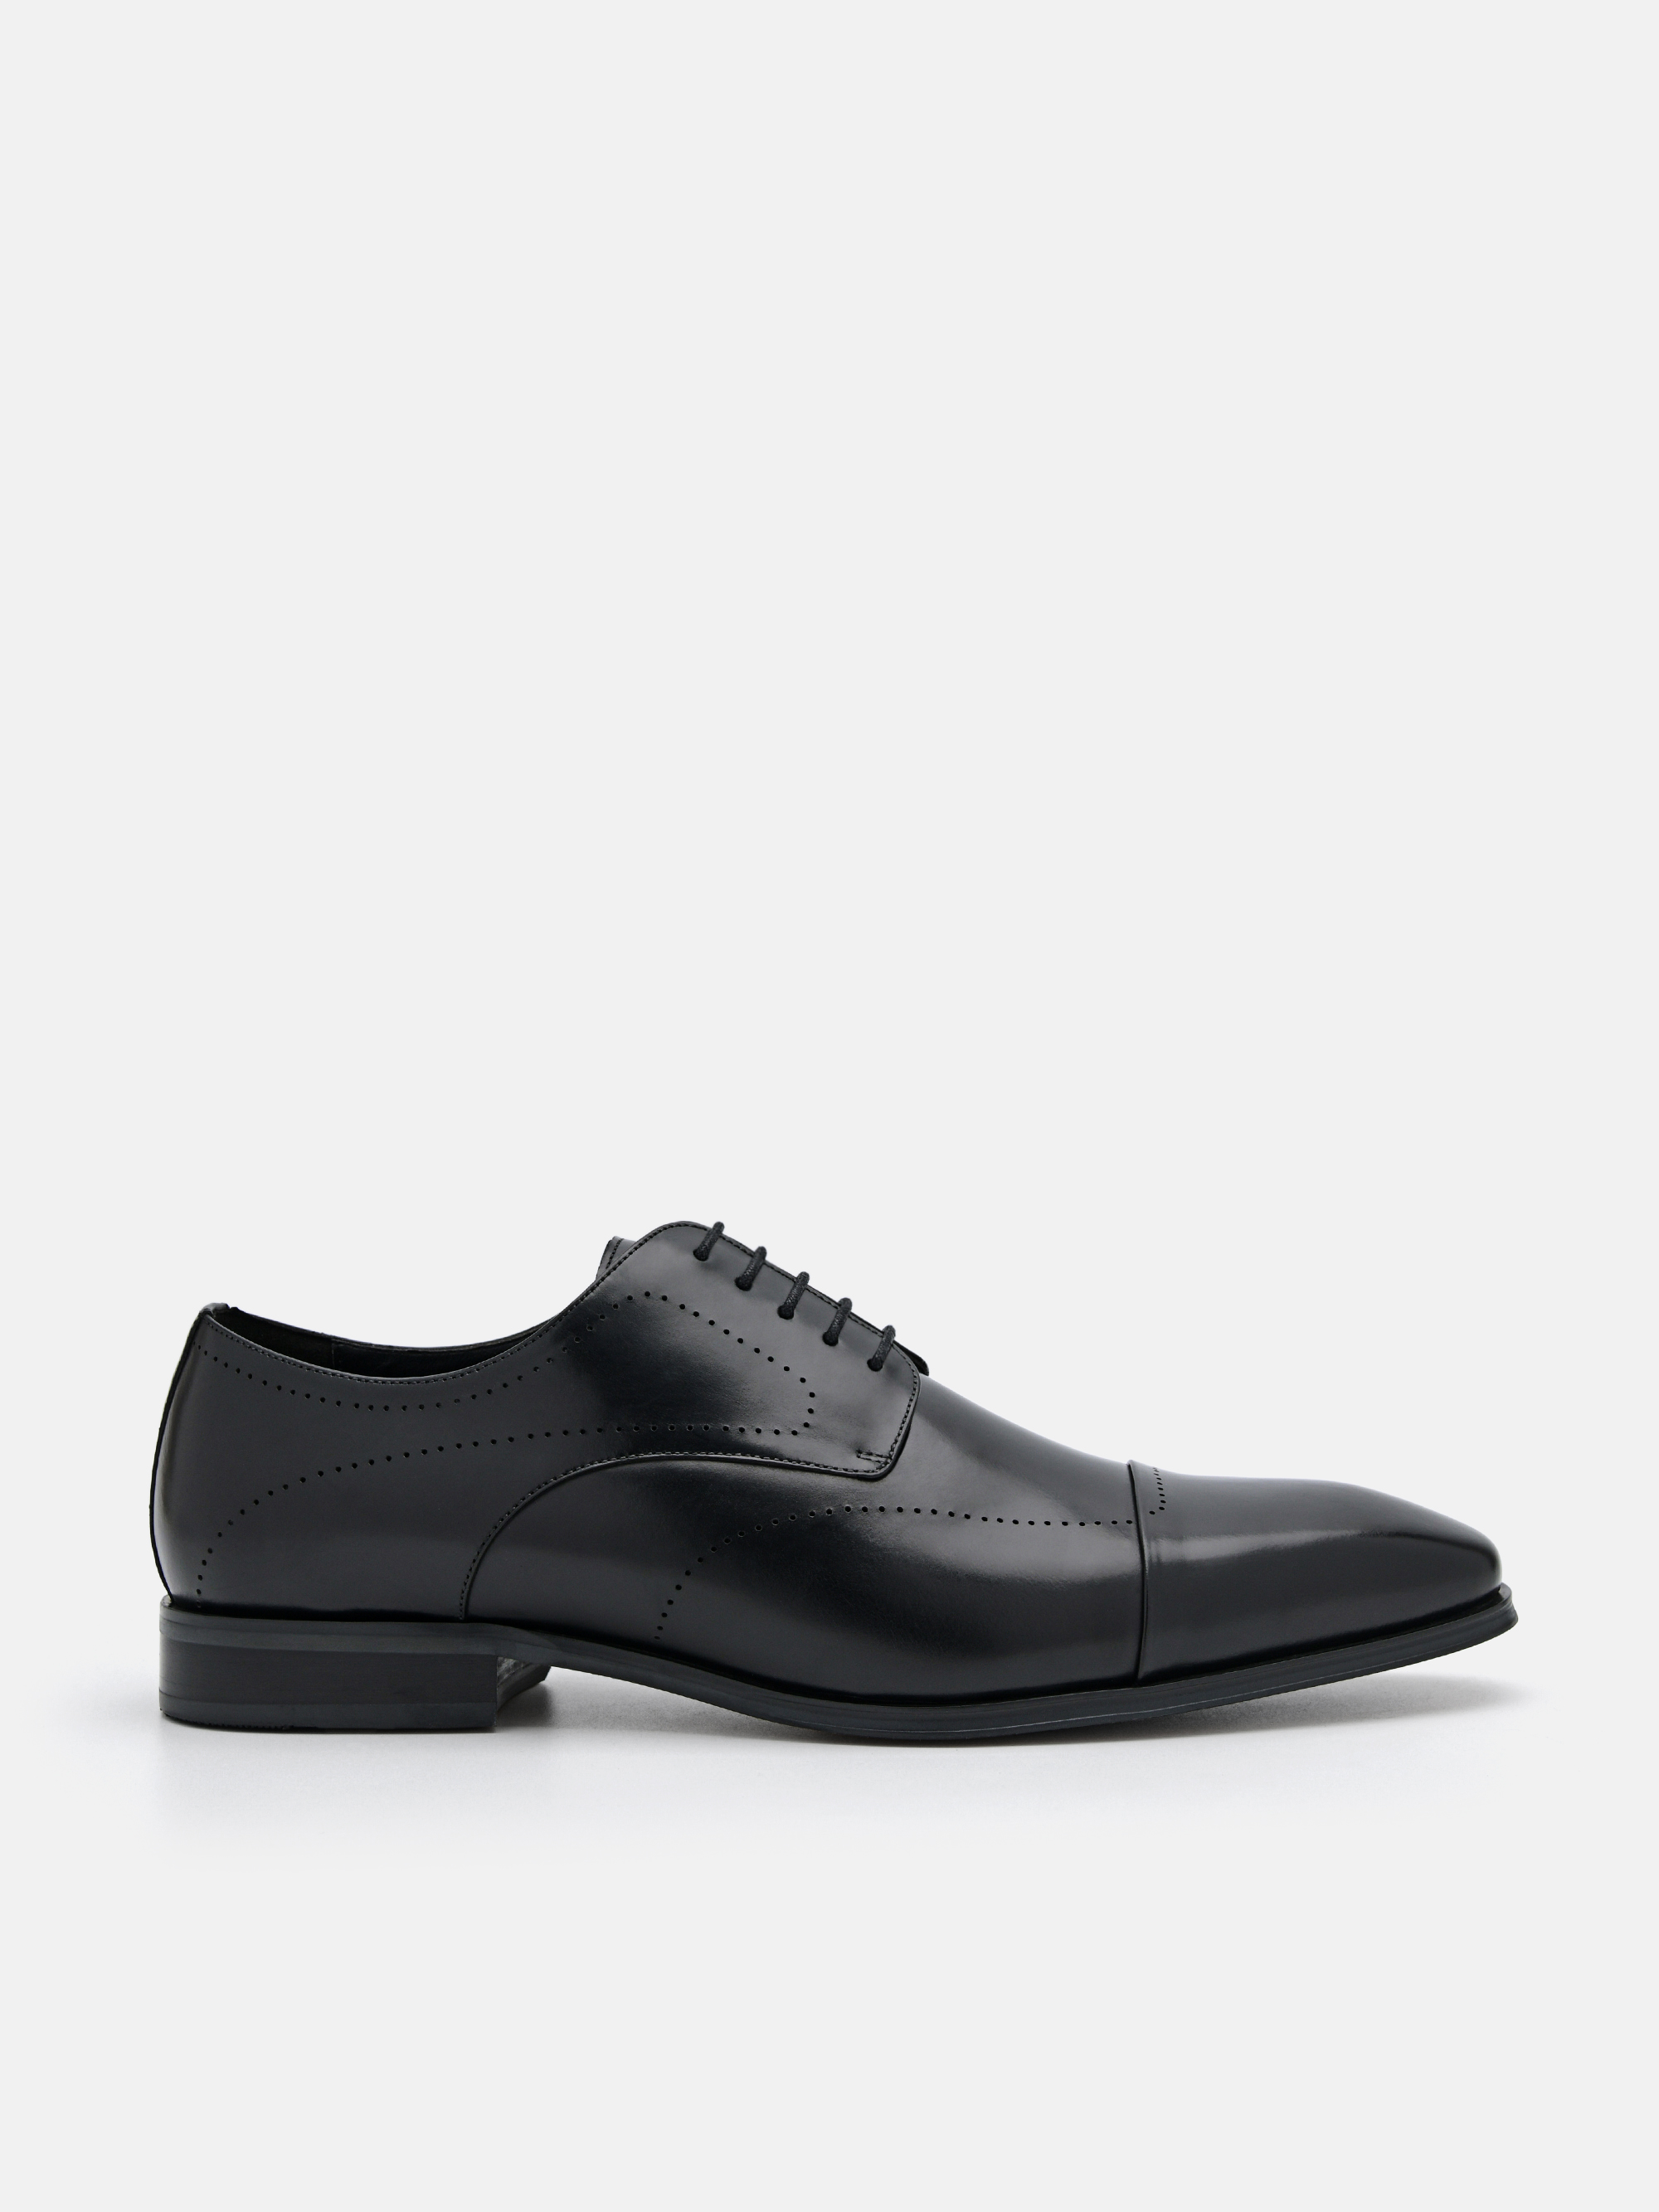 Black Leather Brogue Derby Shoes - PEDRO SG